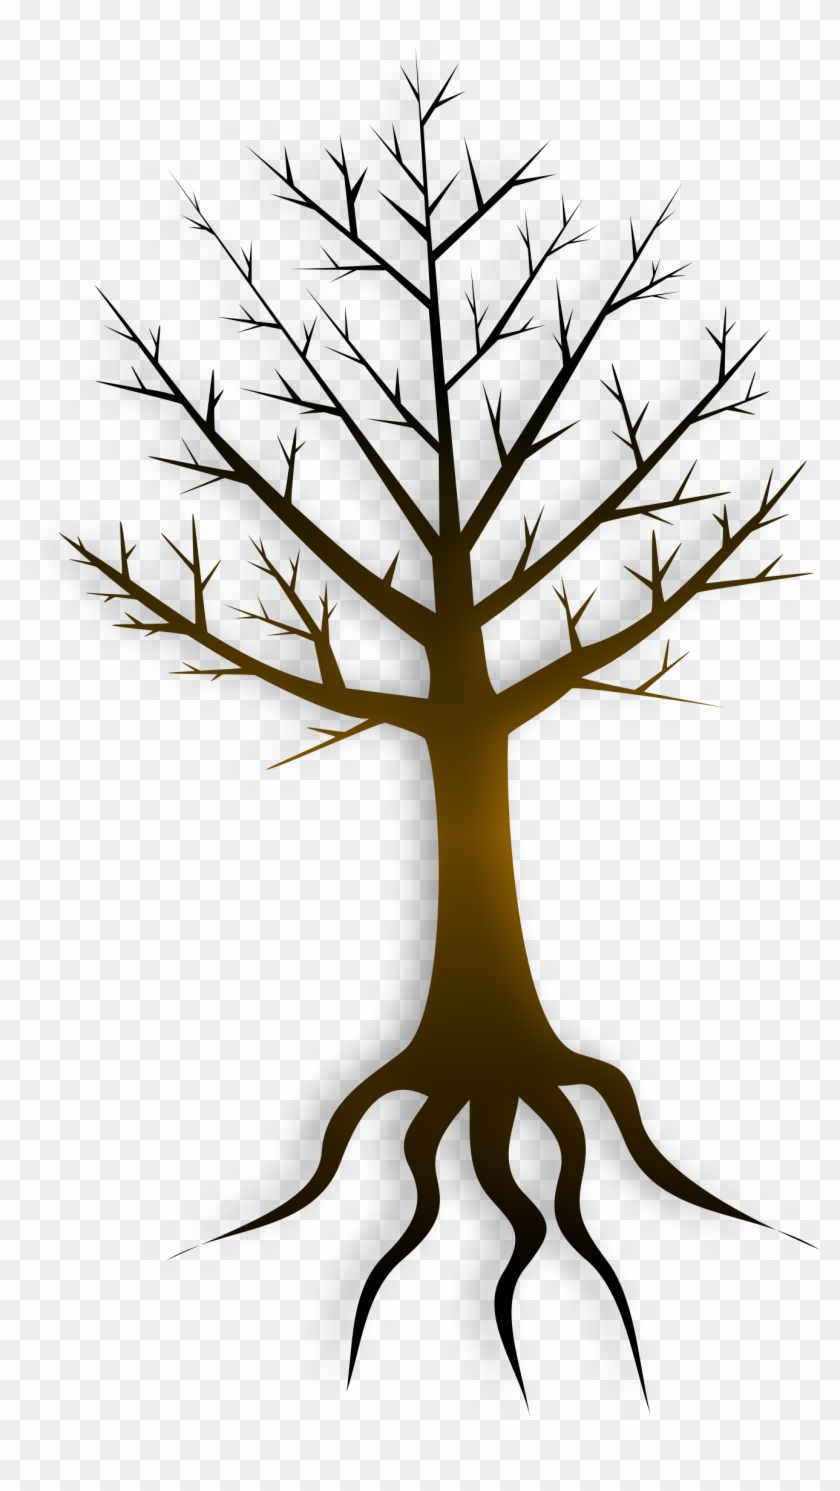 Tree Trunk Big Image - Stop Corruption Poster Clipart